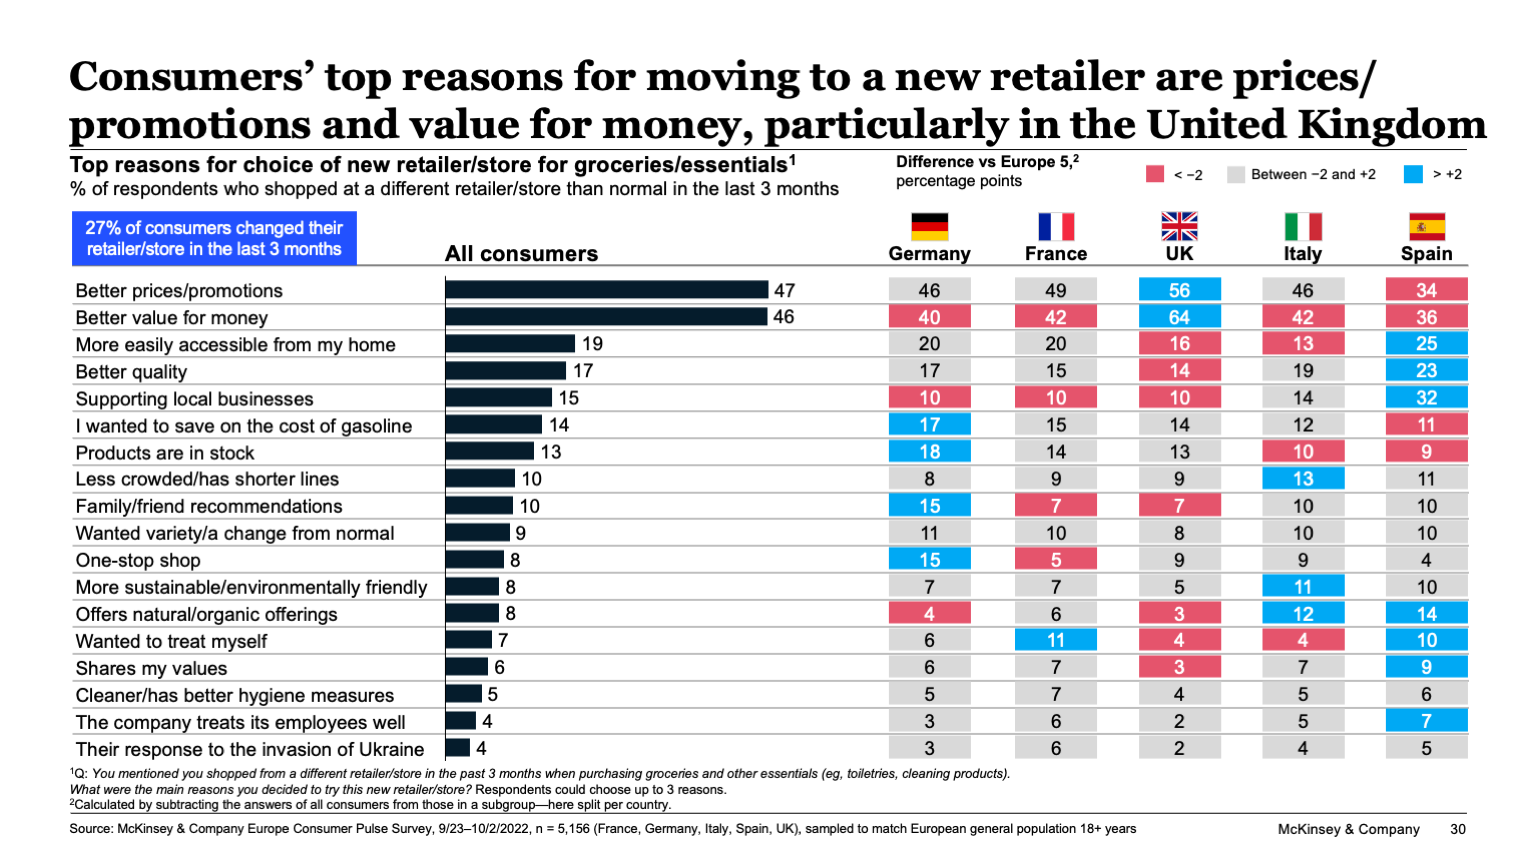 Consumers’ top reasons for moving to a new retailer are prices/ promotions and value for money, particularly in the United Kingdom